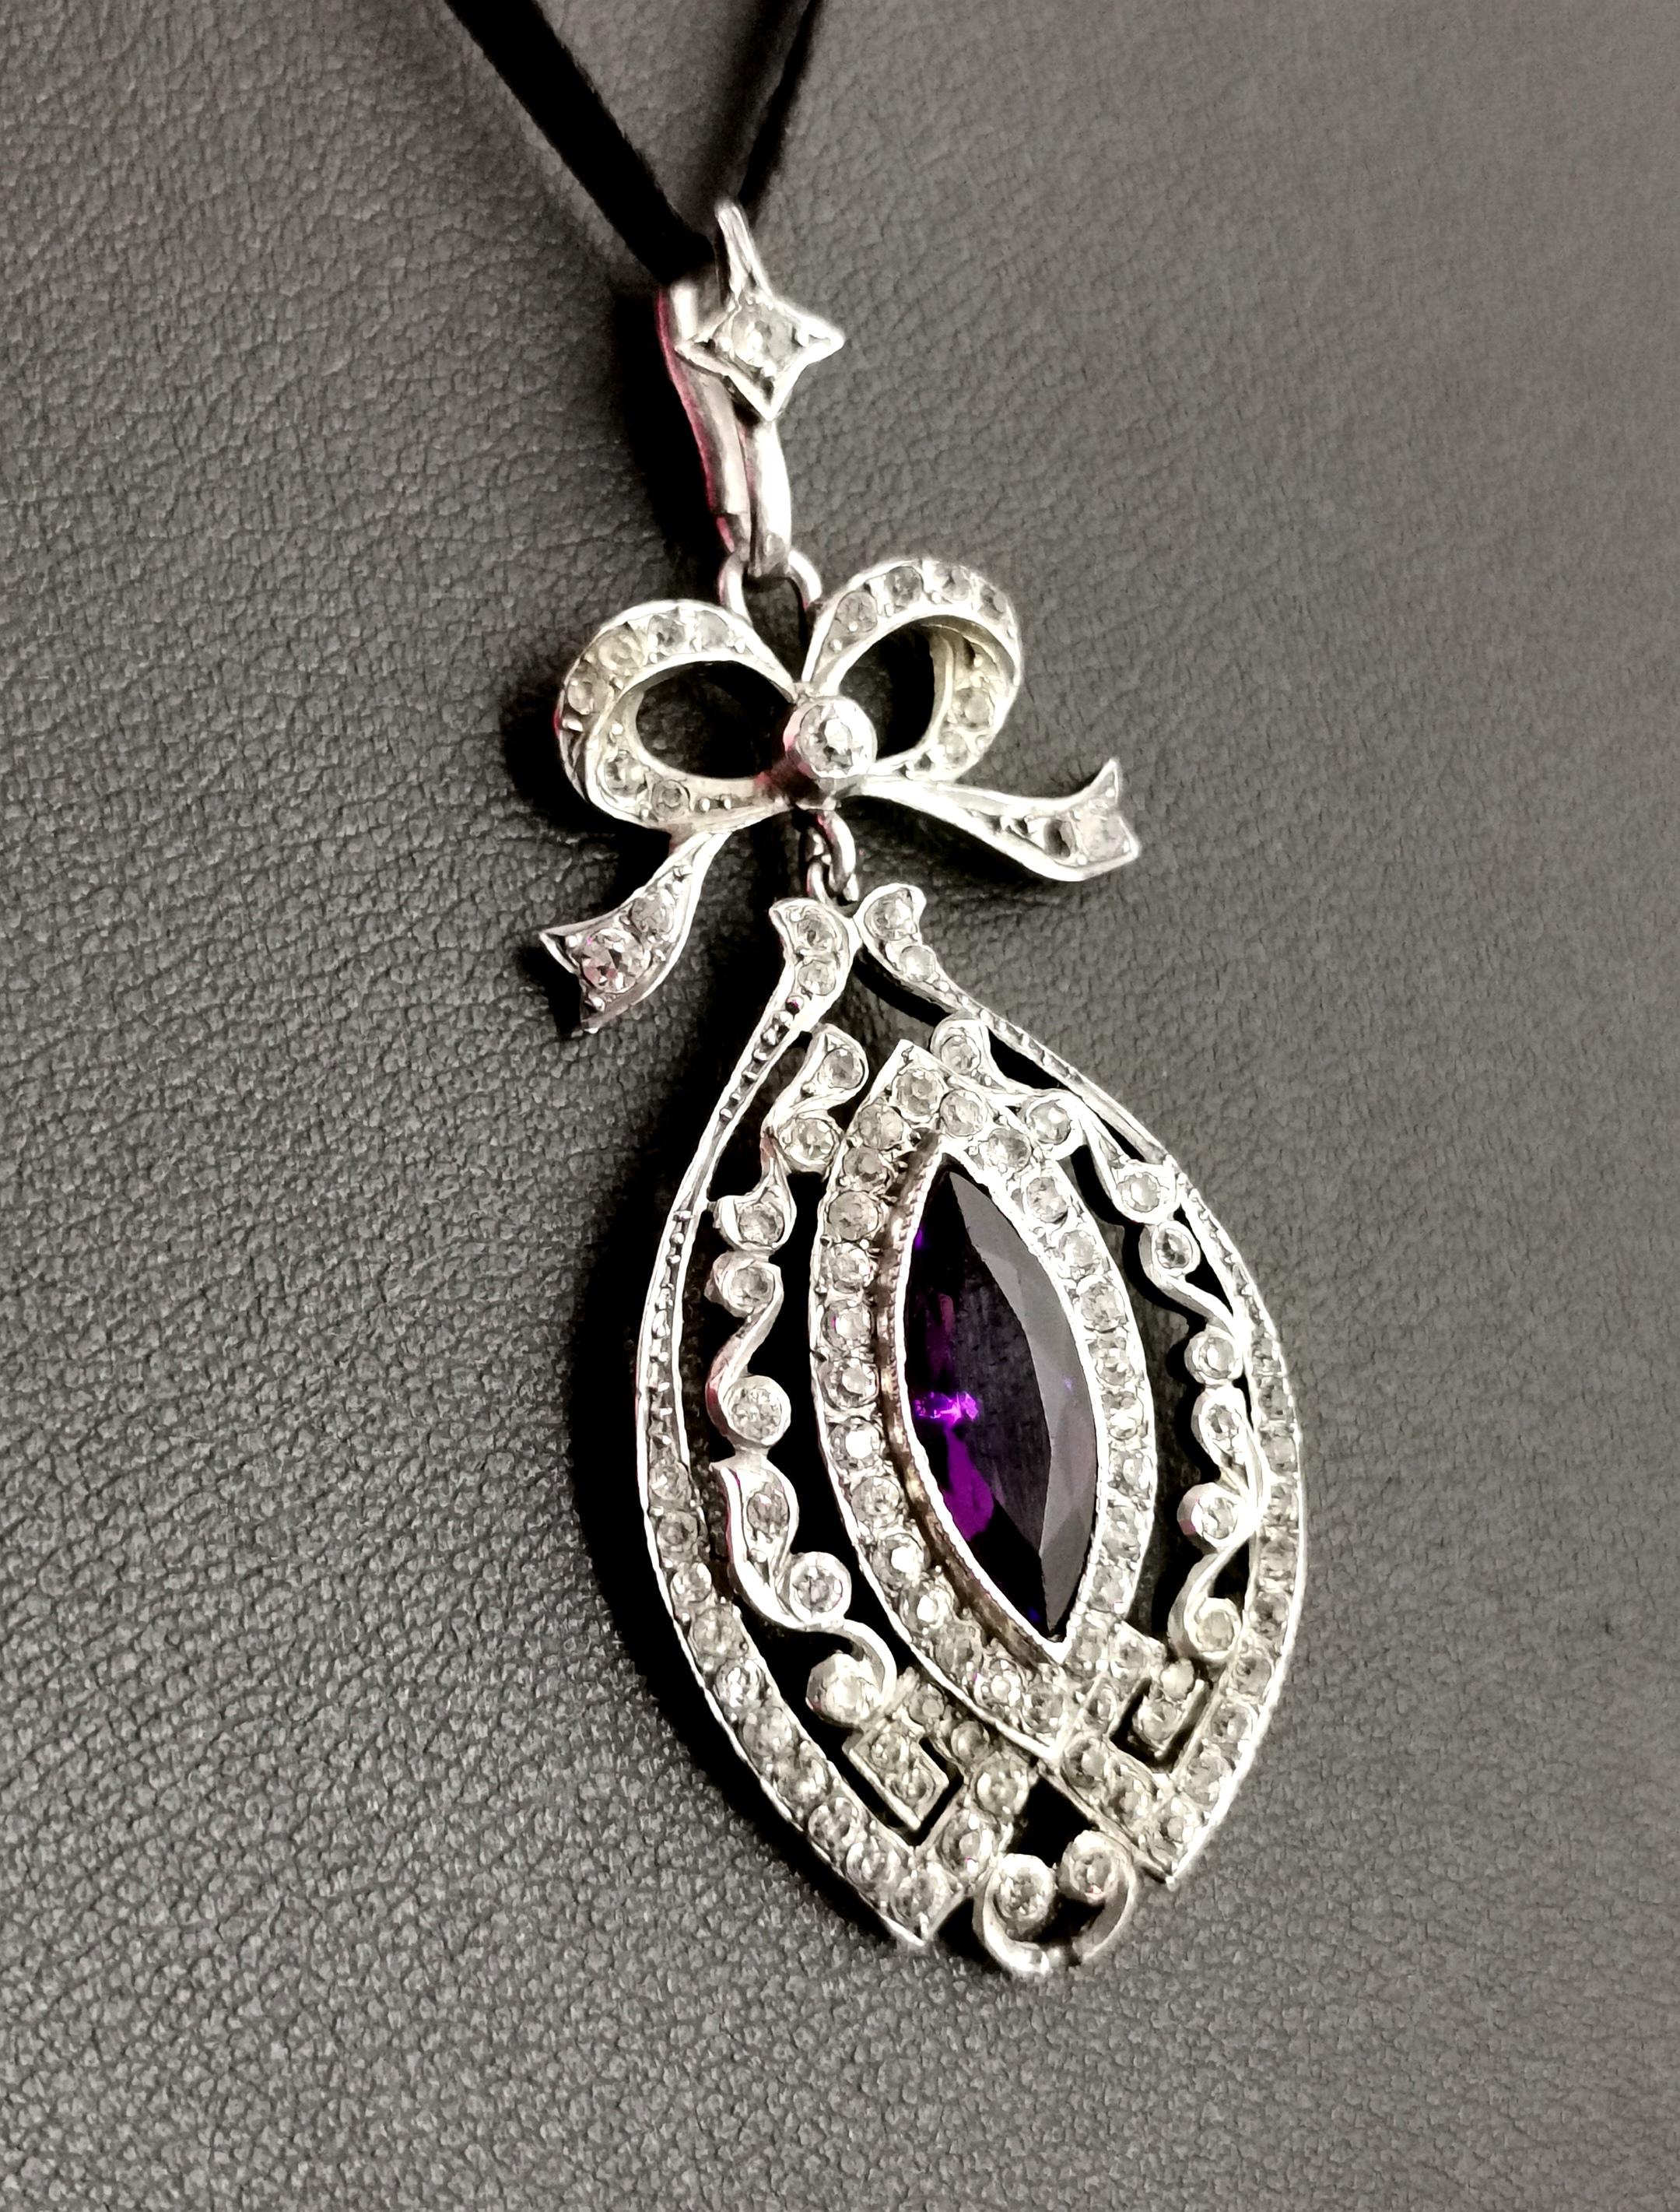 A divine Antique Edwardian silver paste pendant.

A belle epoque style piece, it has a large ellpise shaped drop set with a faceted Amethyst paste stone to the centre.

The deep purple paste is surrounded by a border of sparkling diamond paste and